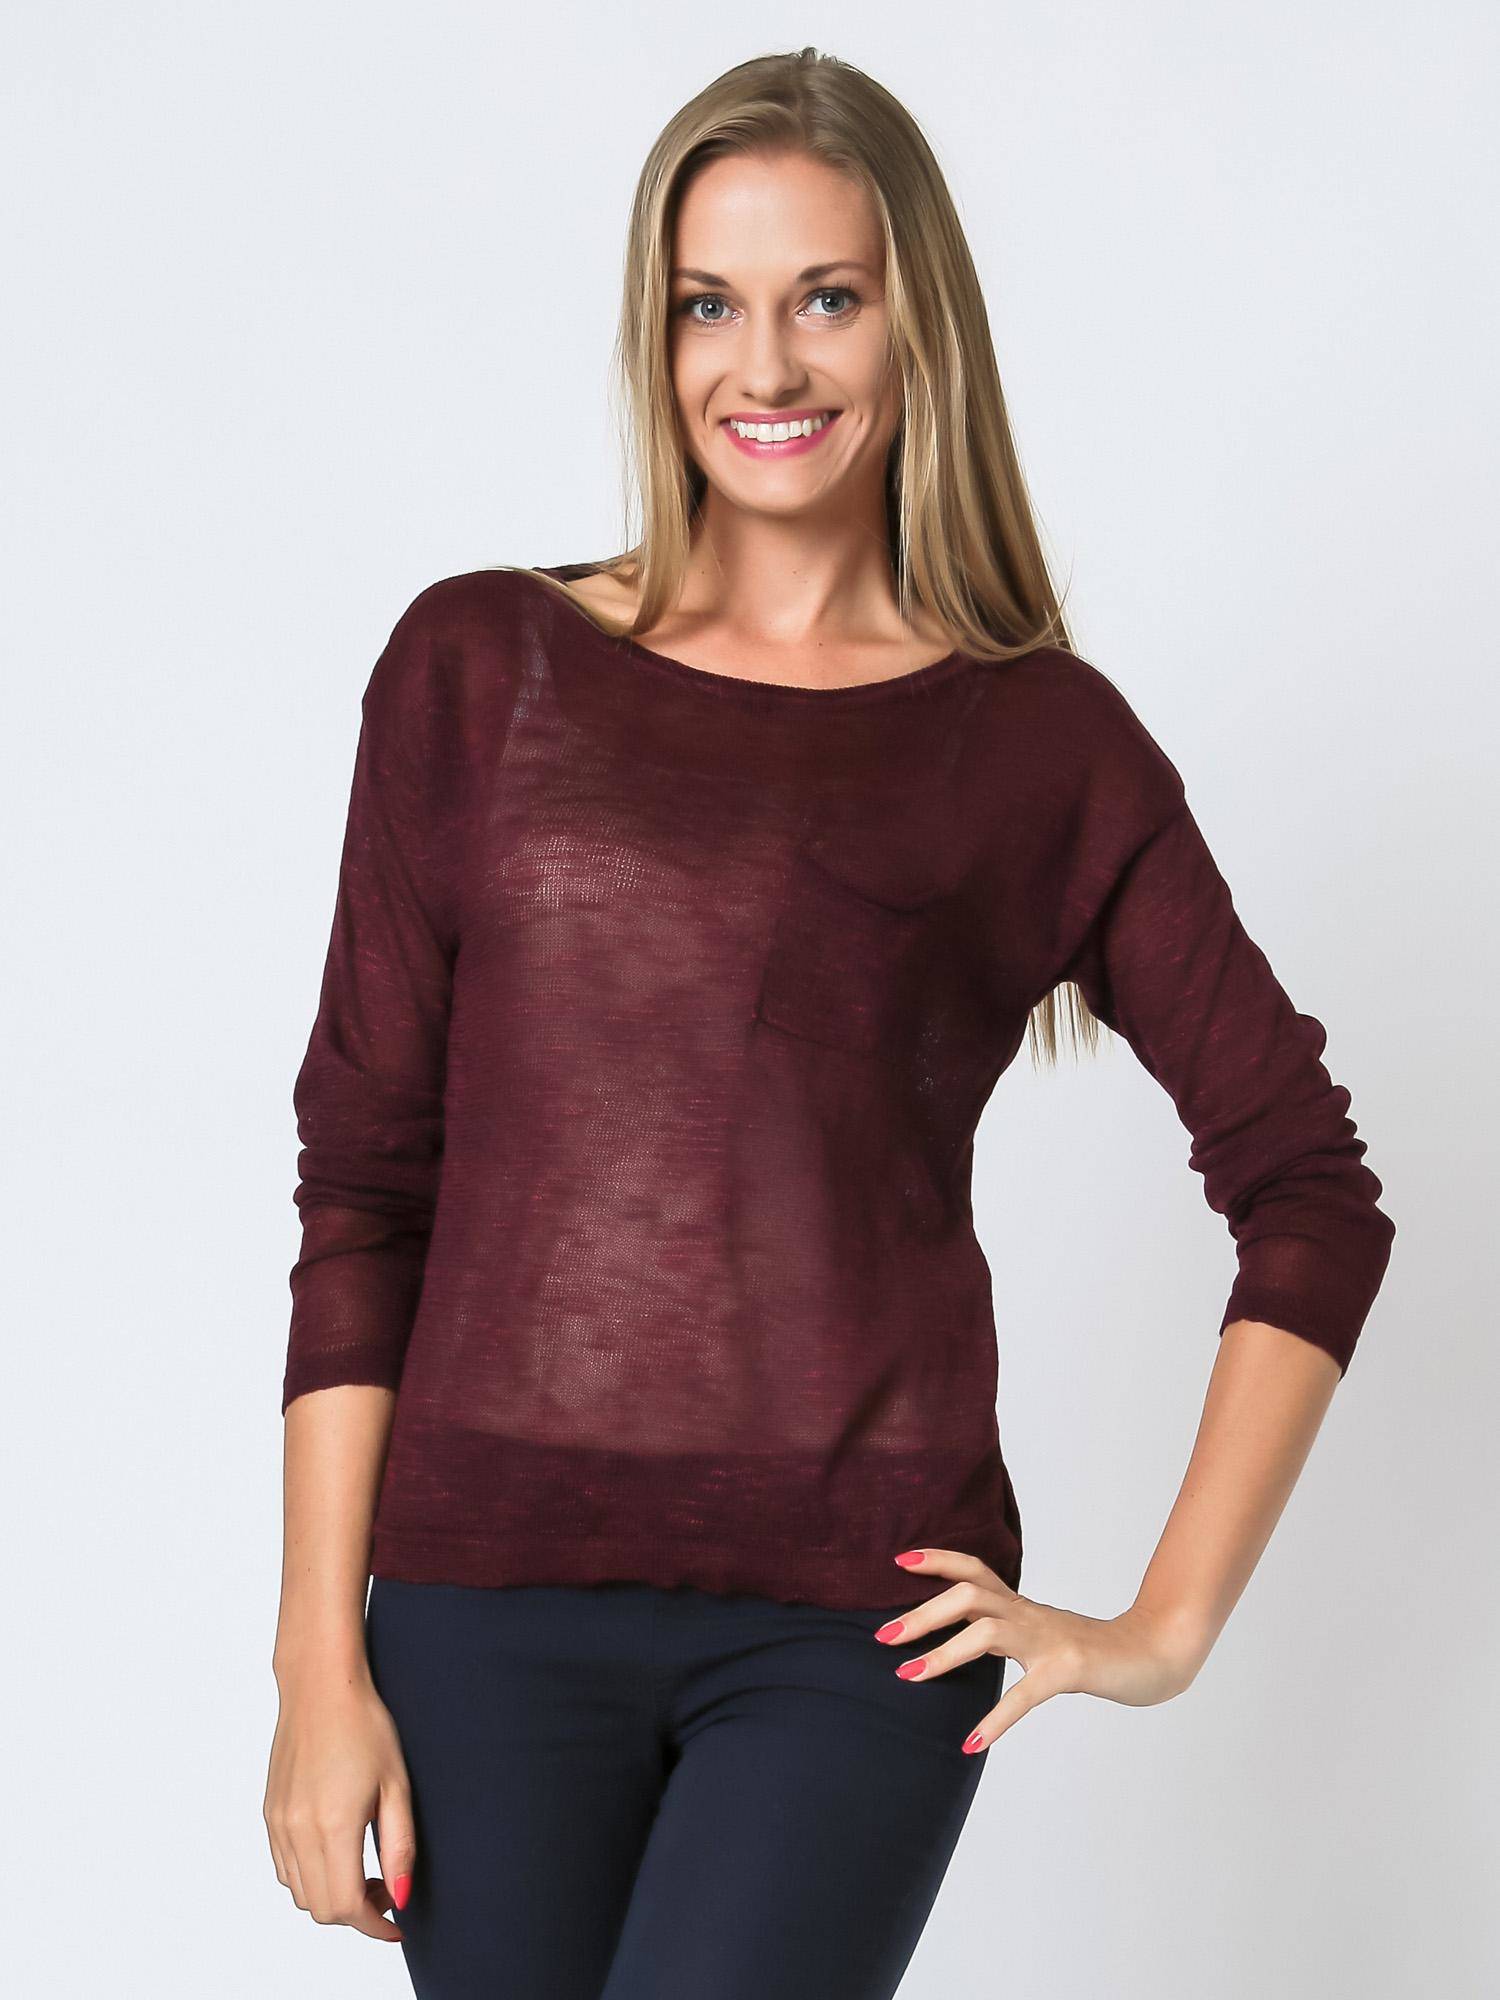 Thin sweater with burgundy pocket